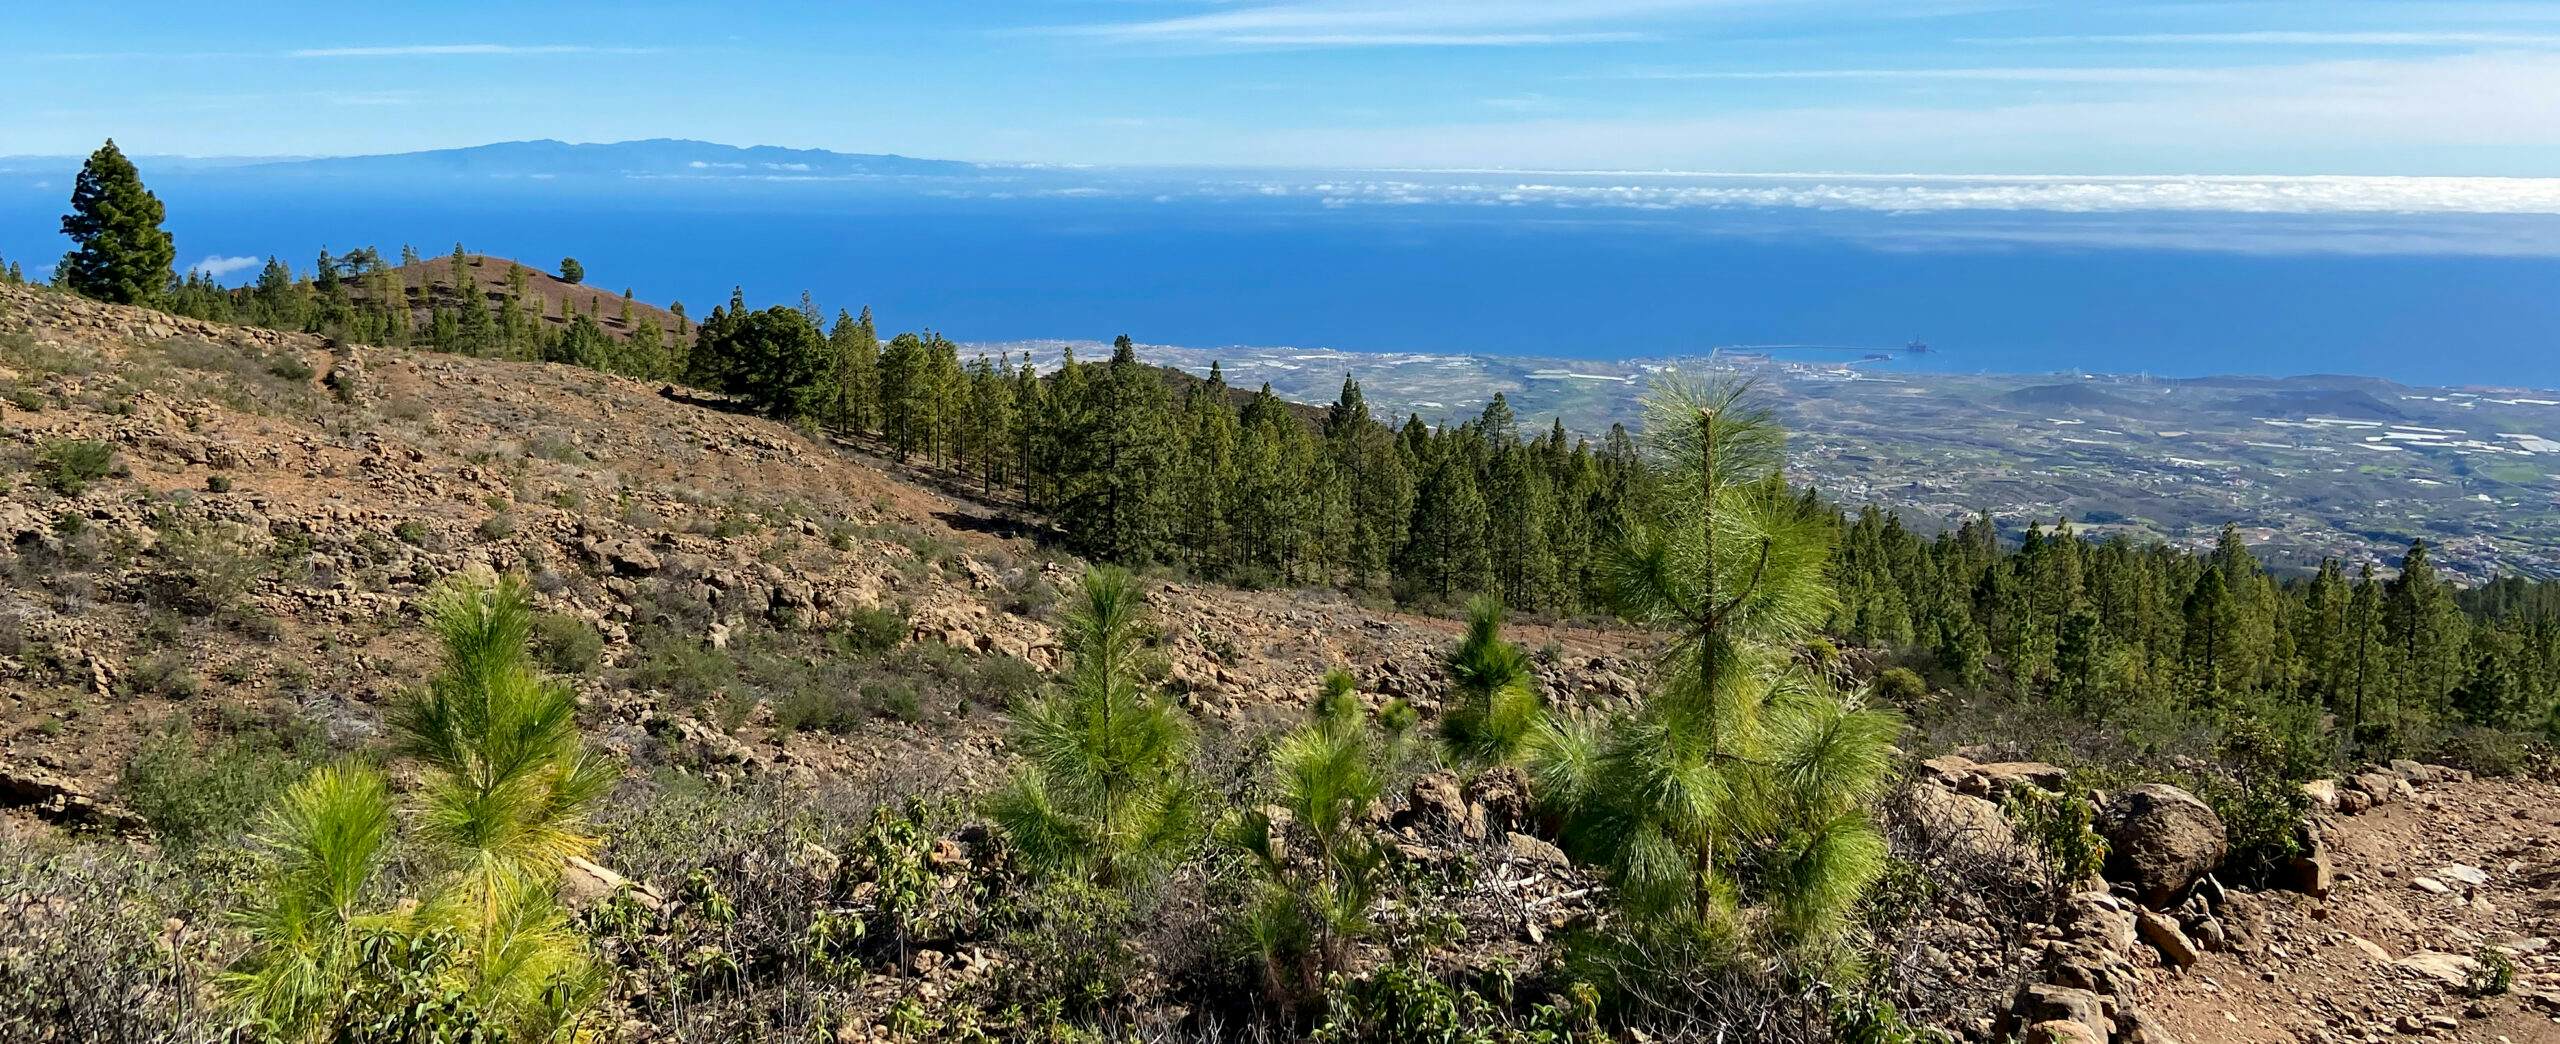 View of Gran Canaria from above